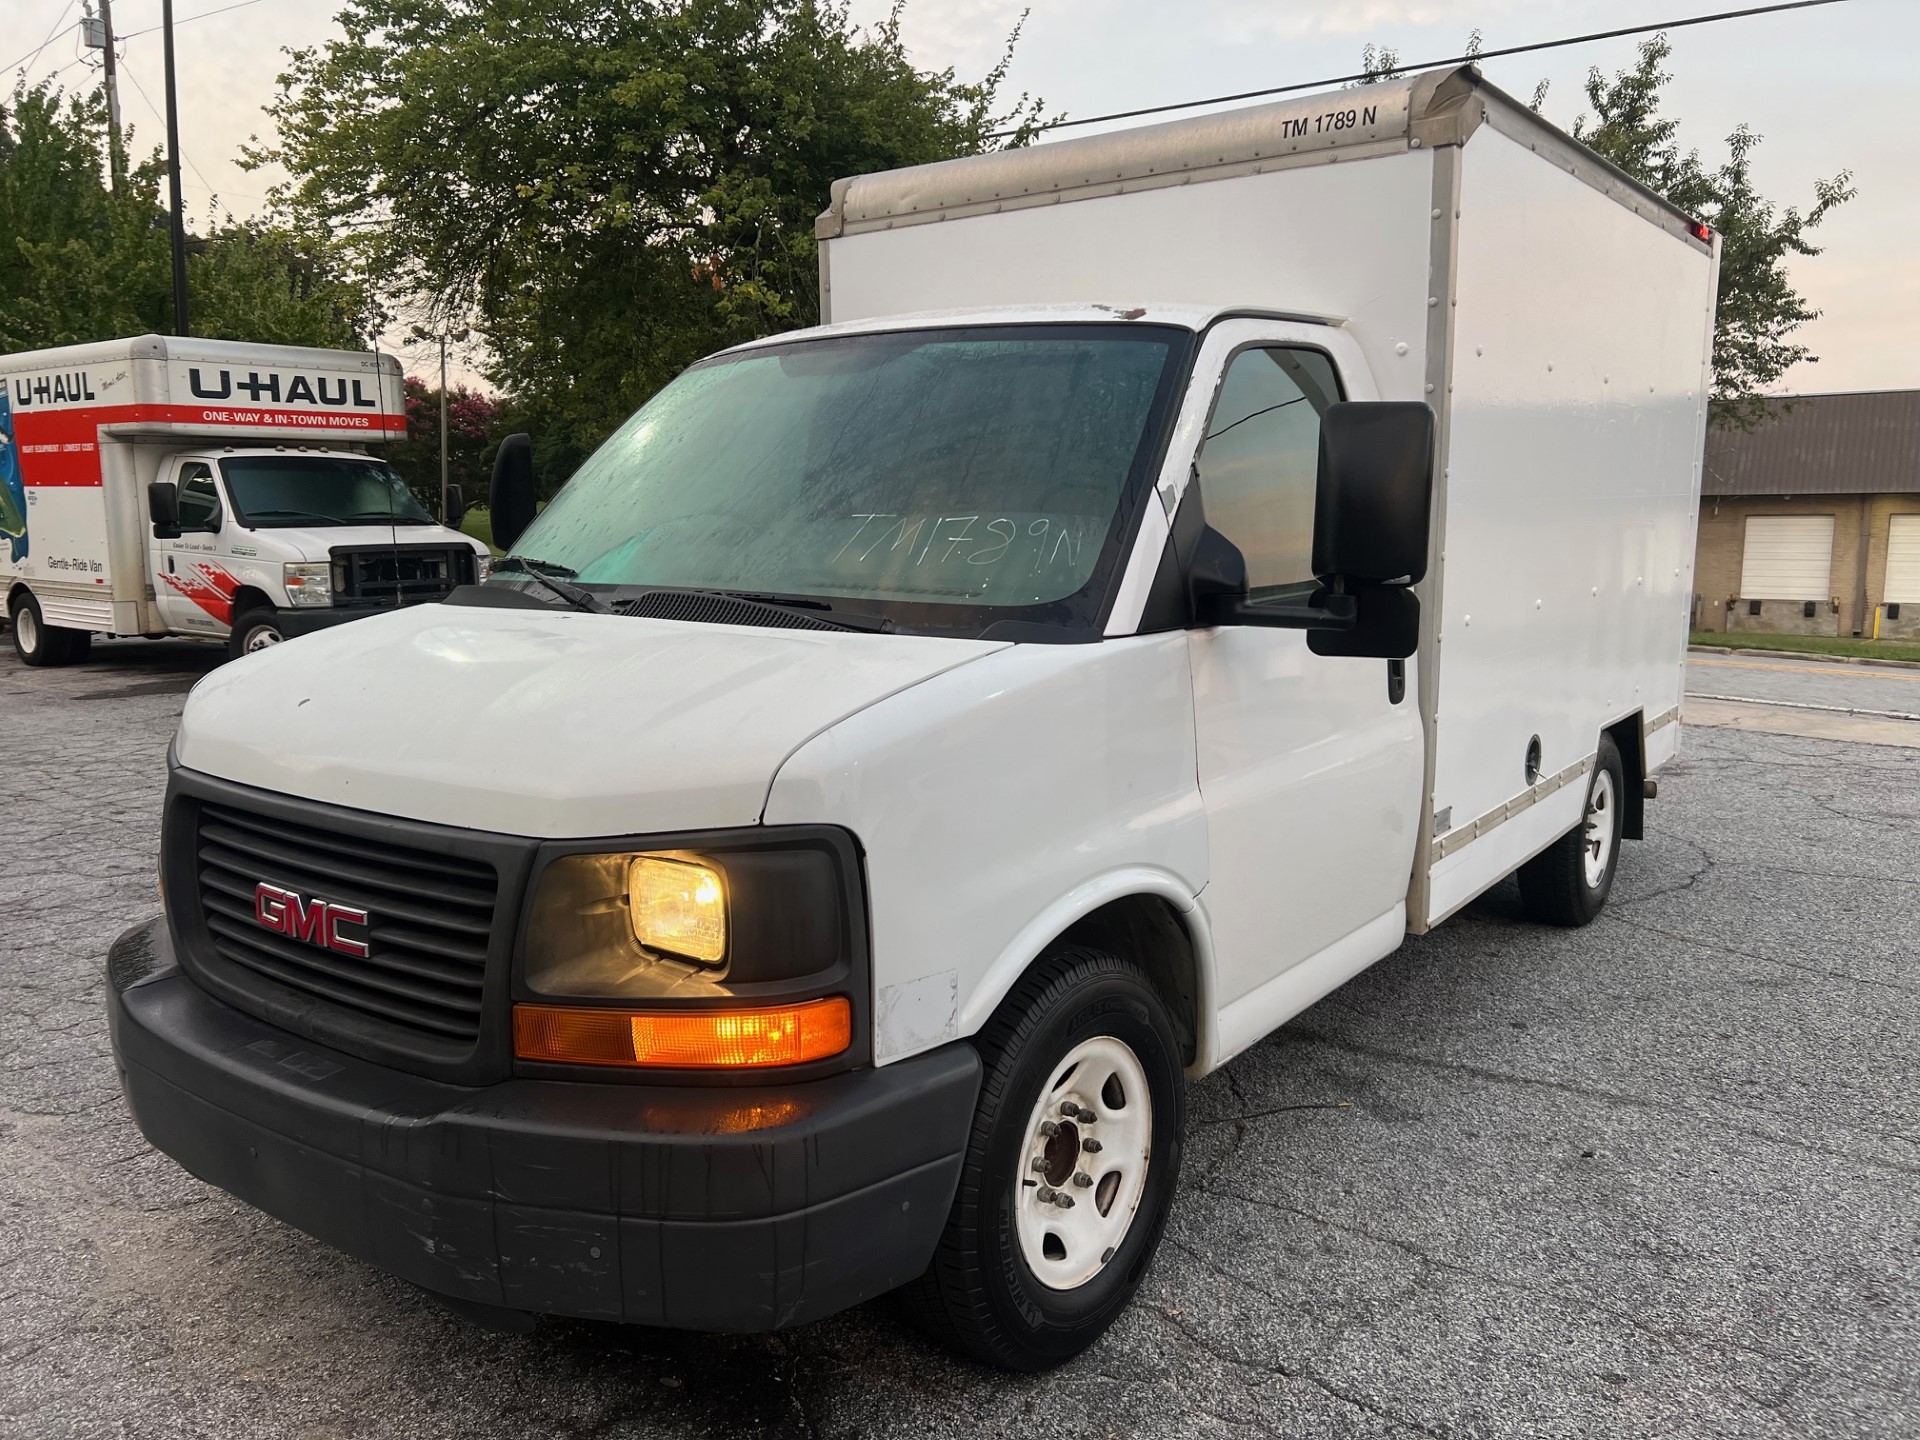 Used 2011 10 ' Box Truck for sale